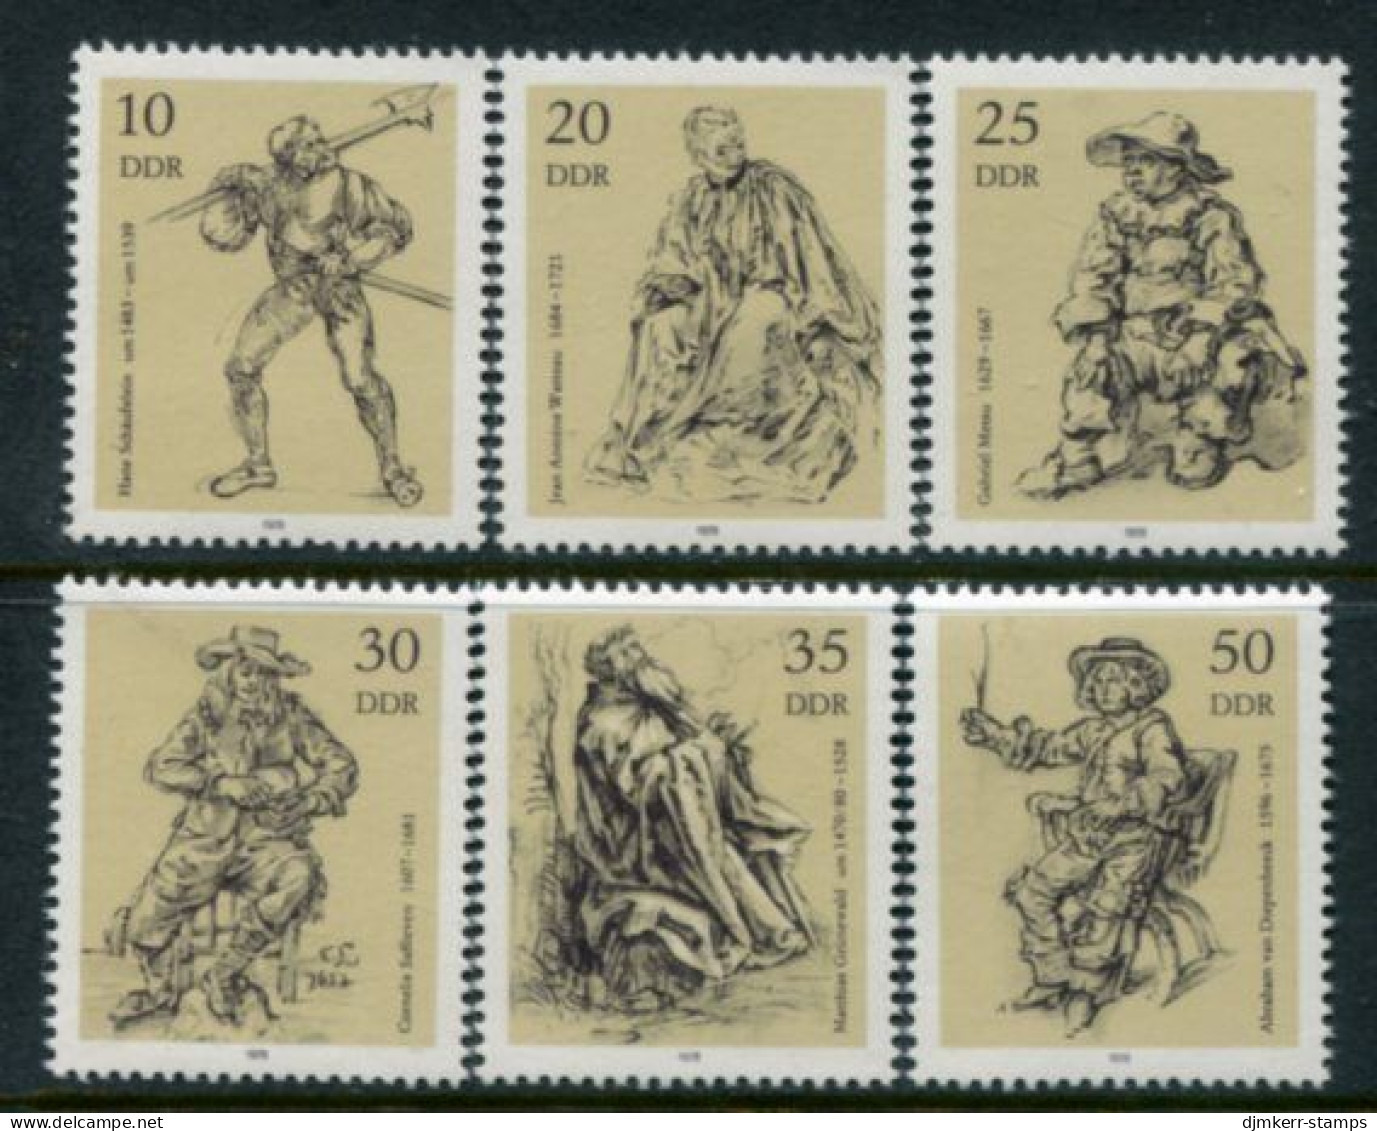 DDR / E. GERMANY 1978  Engravings In State Mseum Singles MNH / **.  Michel 2347-52 - Unused Stamps